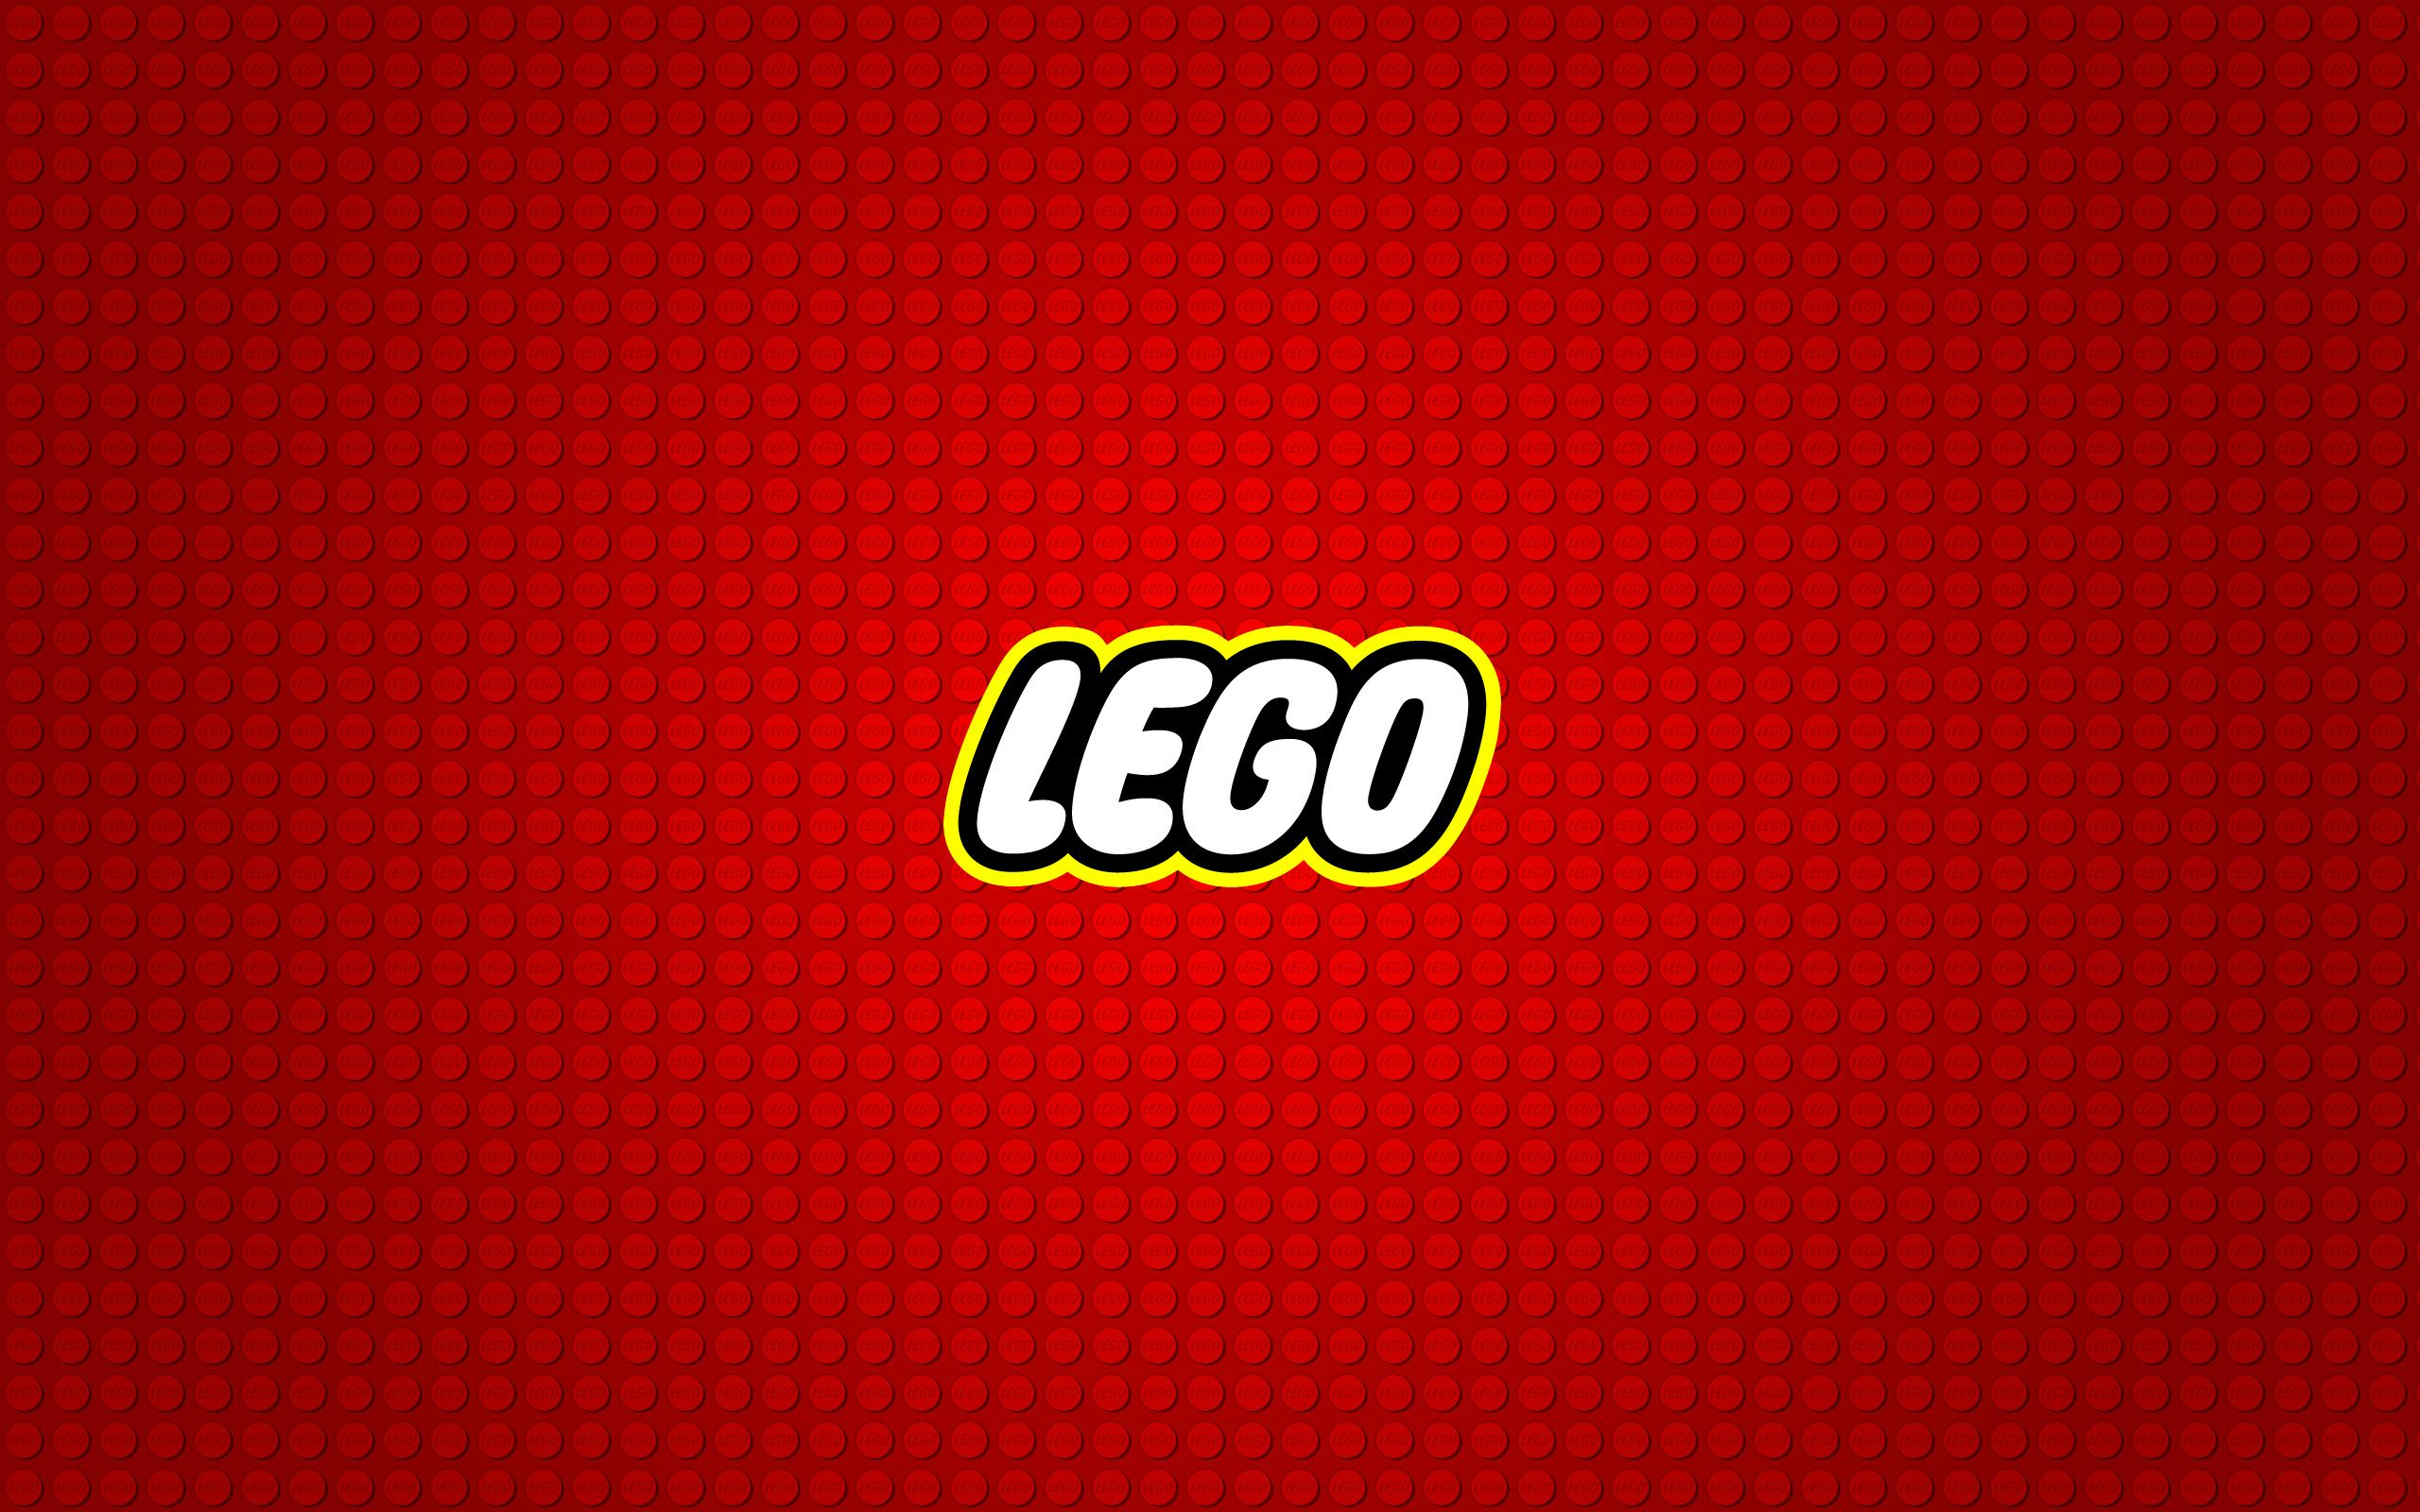 Lego Logo Wallpaper I Can Change The Background Color To Just About